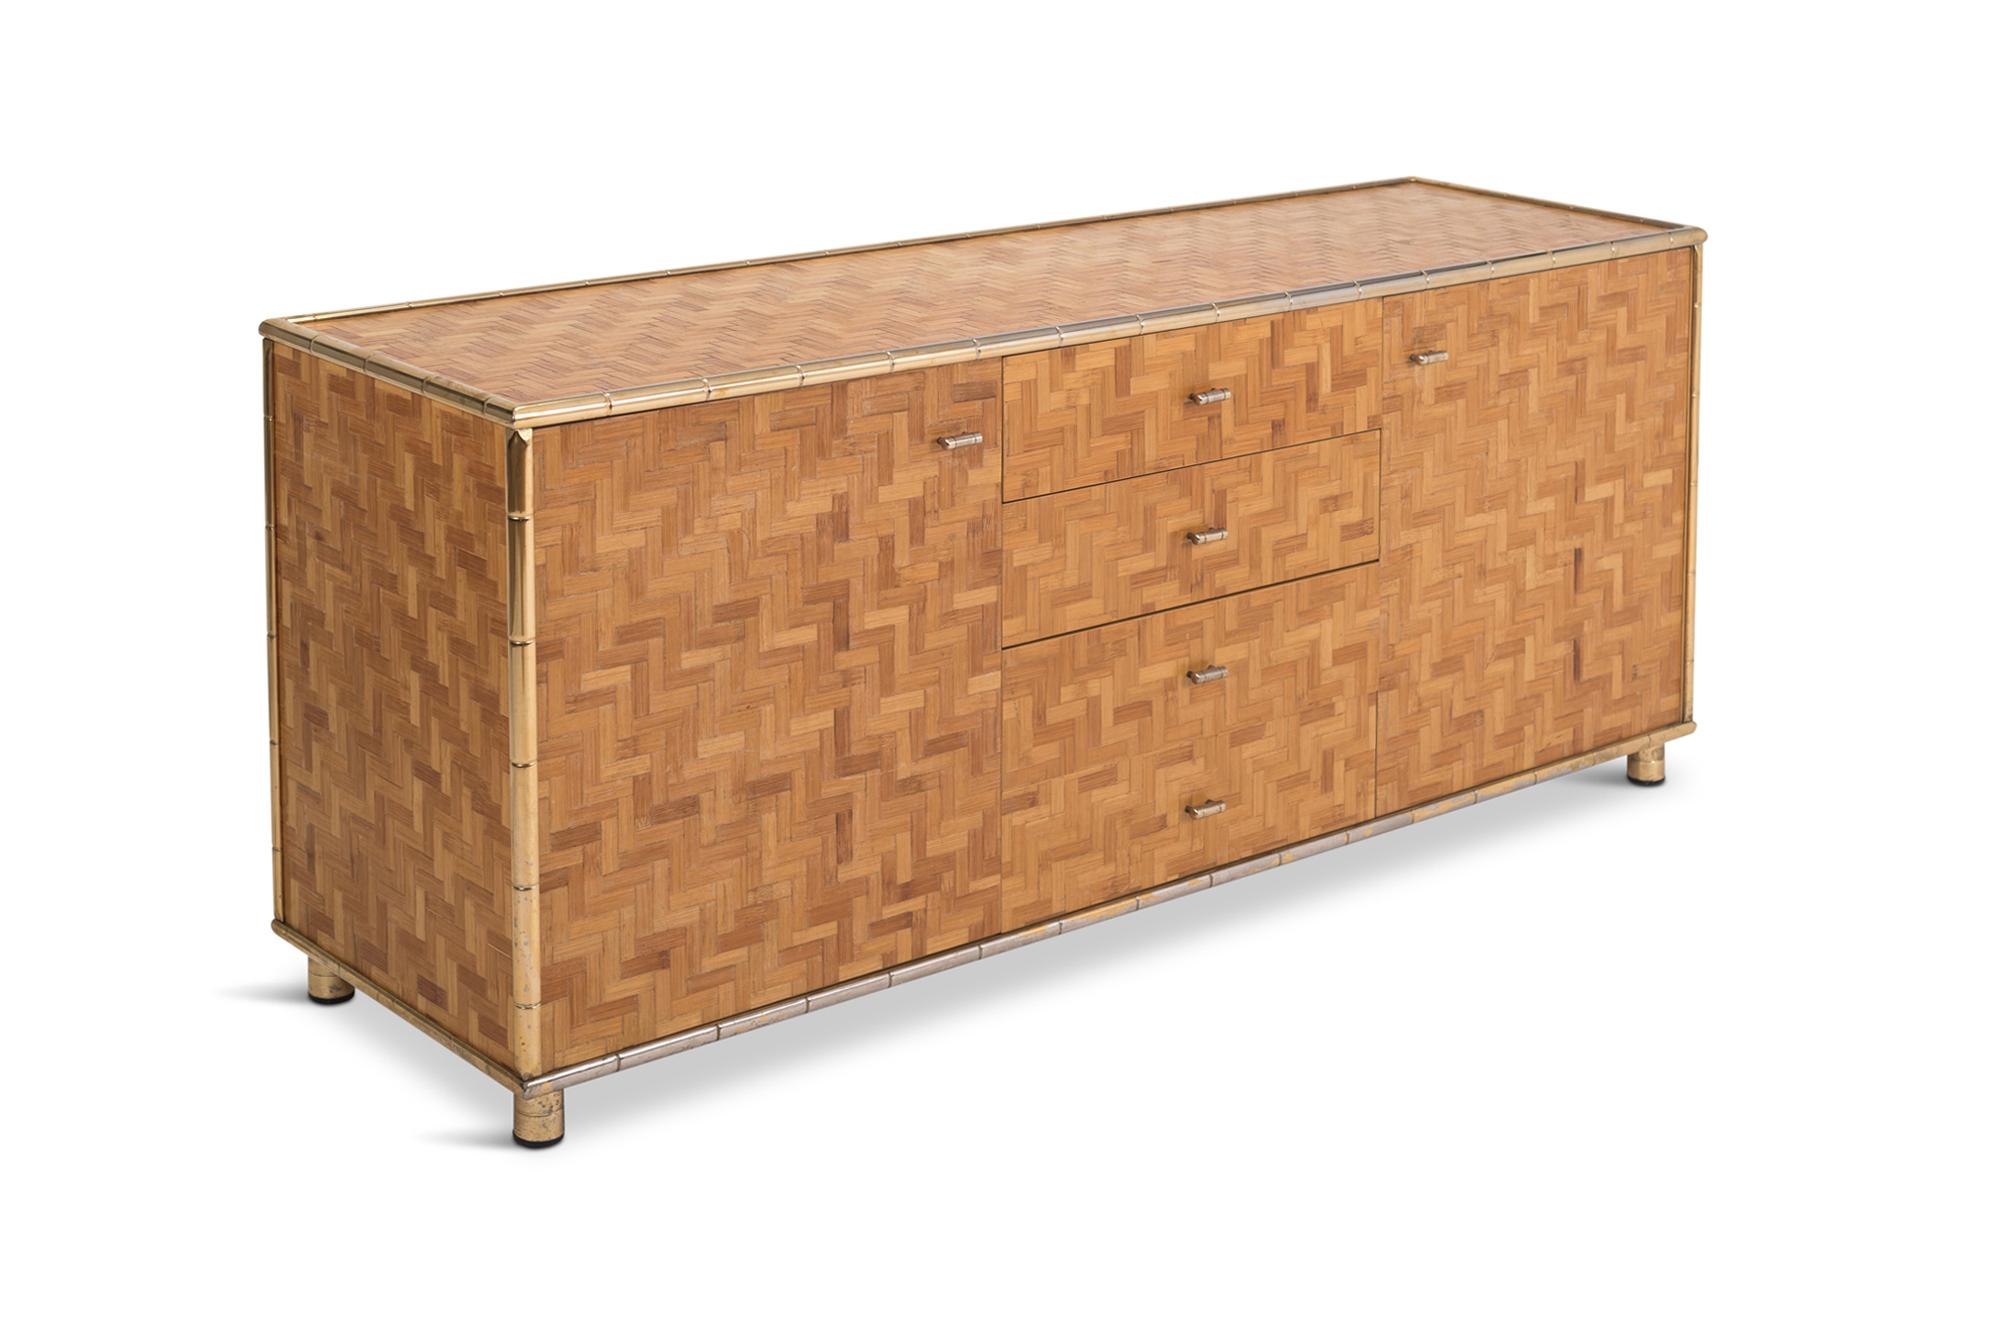 Rattan cladded sideboard with brass bamboo shaped edges, giving this item a very warm (almost tropical) appearance. 

In Hollywood Regency / Italian glam style, rests on four small brass legs, and provides plenty of storage space due to its large